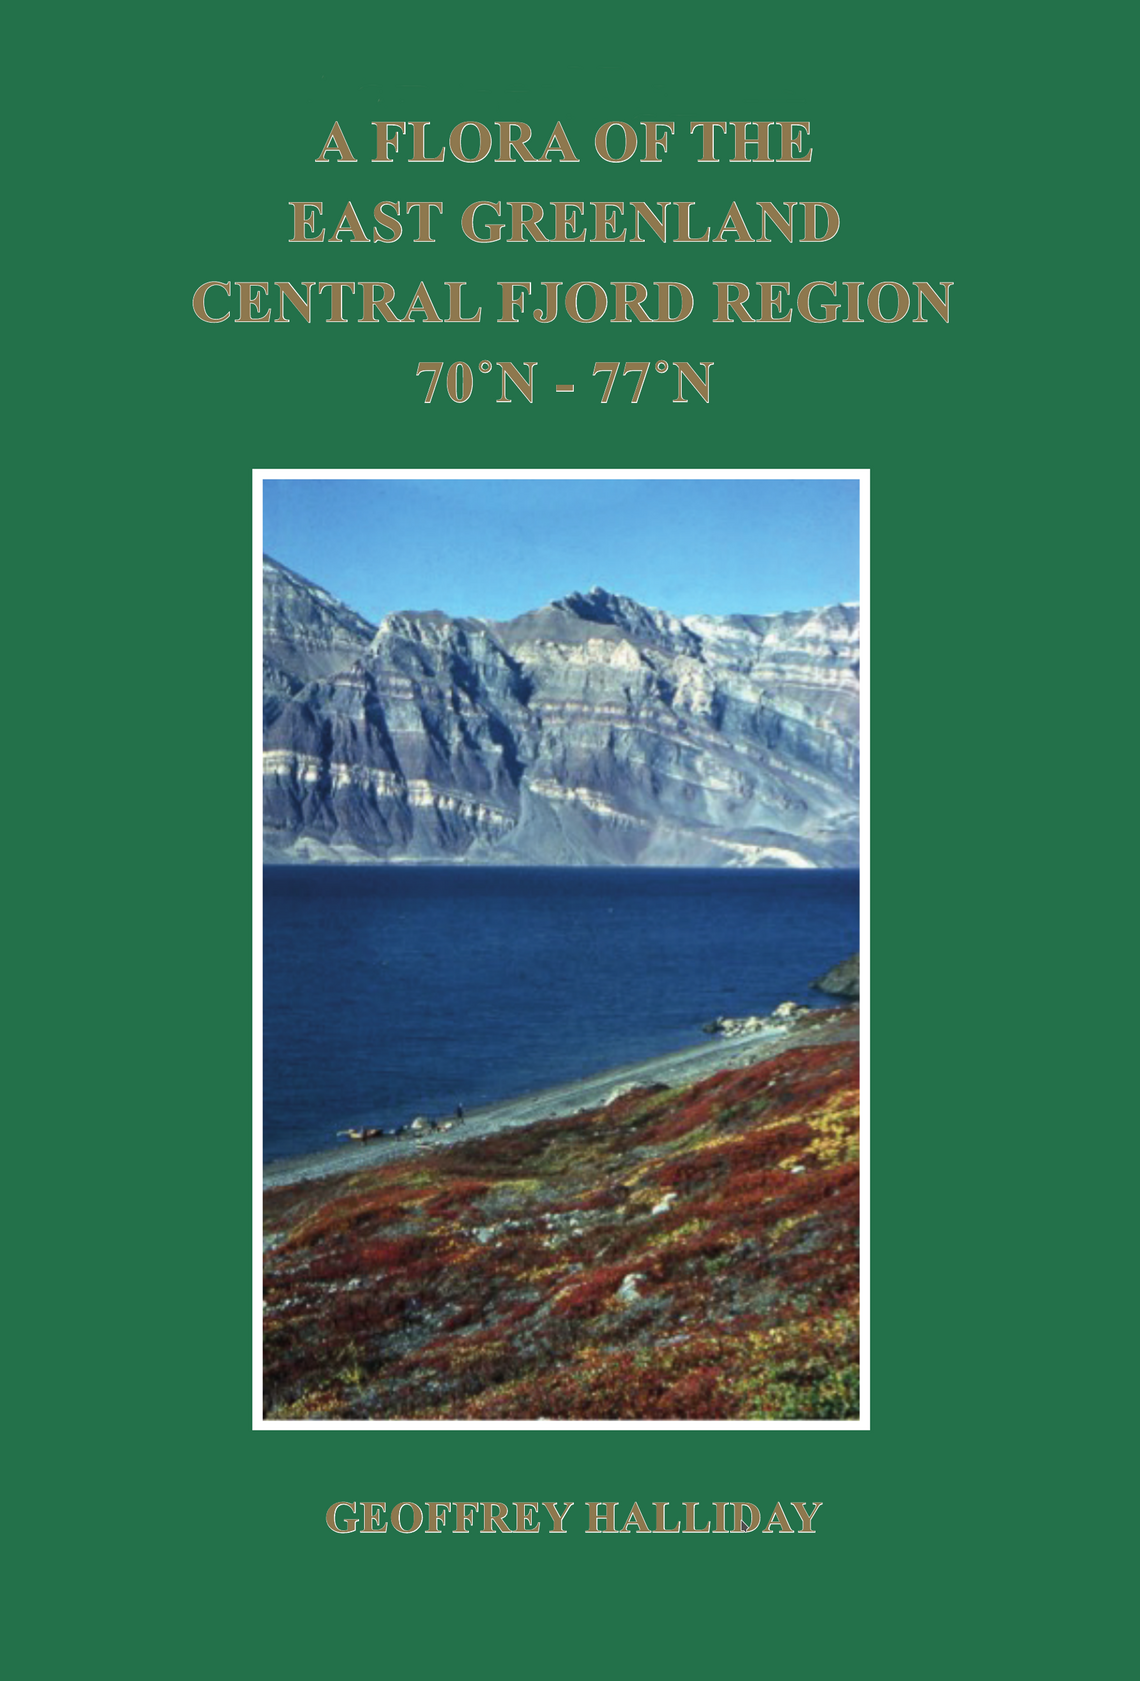 Flora of East Greenland cover